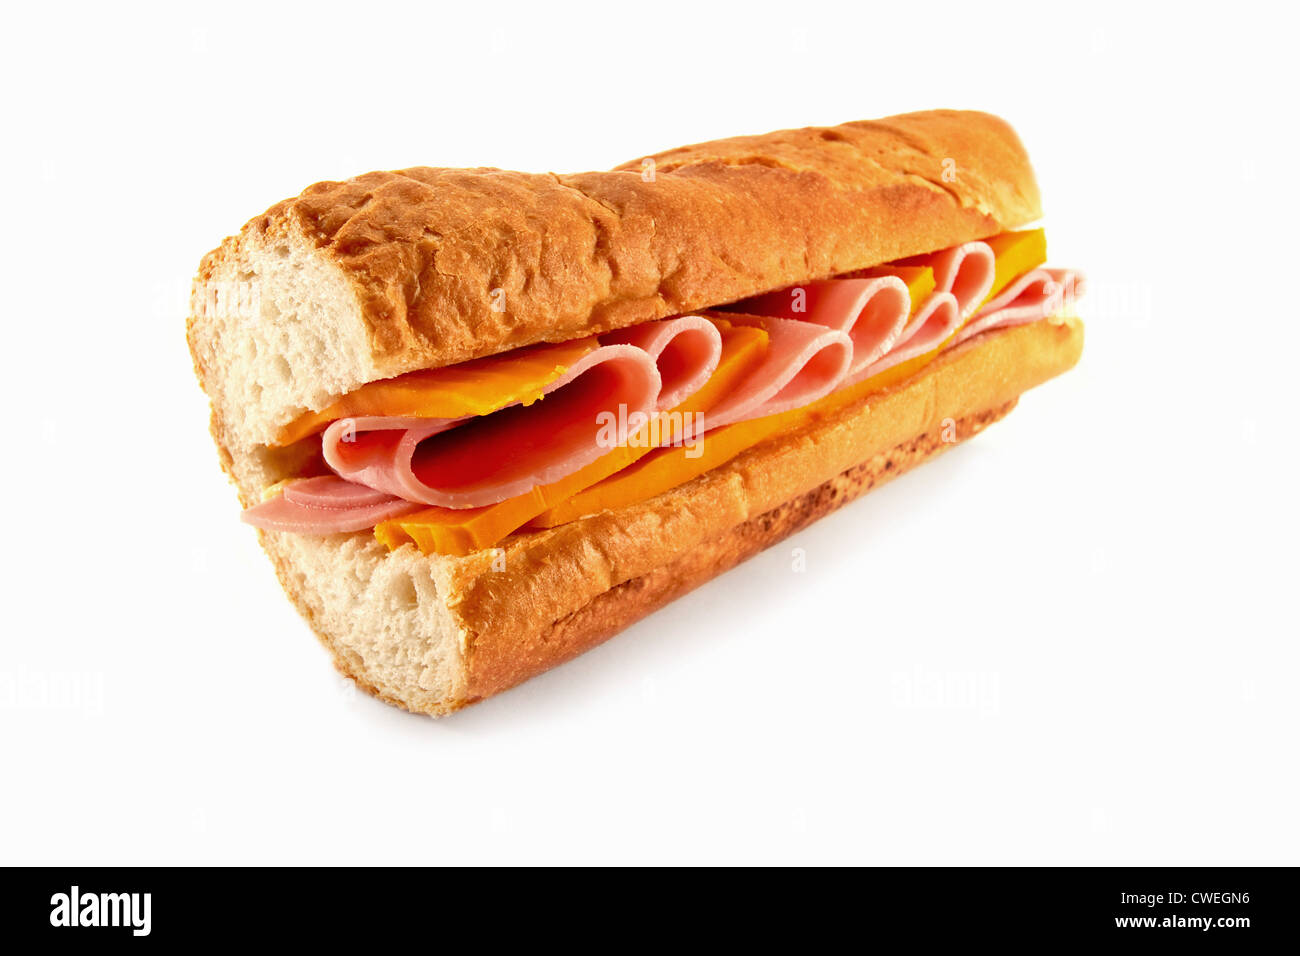 A homemade sandwich baguette with two of the most popular fillings ham and cheese, made with freshly baked french bread Stock Photo